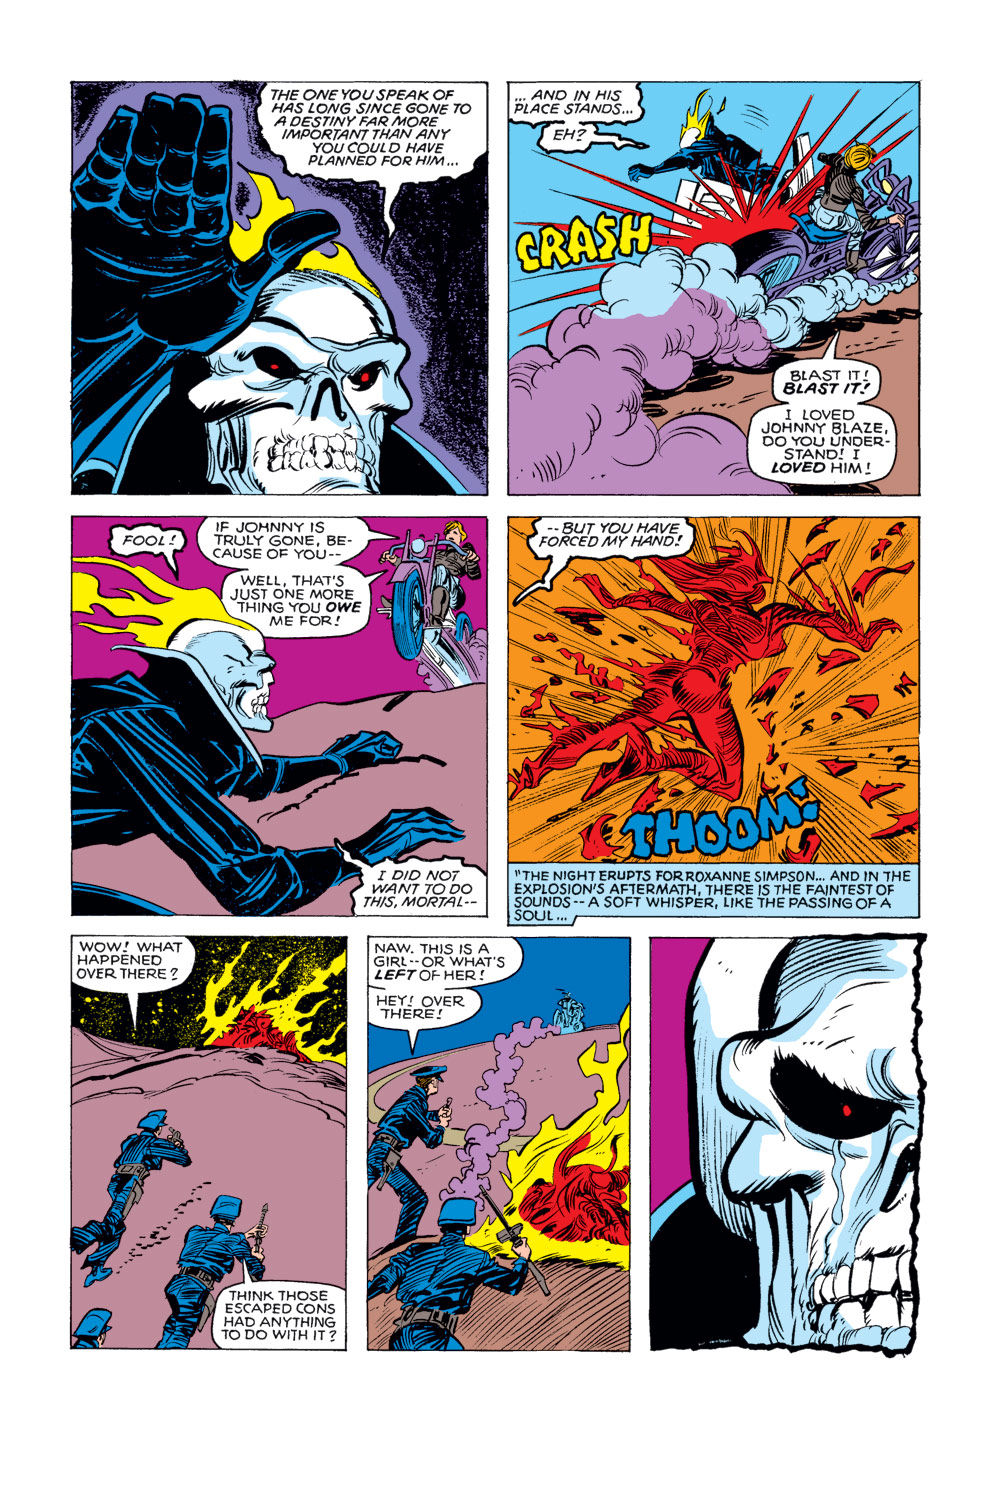 What If? (1977) issue 17 - Ghost Rider, Spider-Woman and Captain Marvel were villains - Page 12